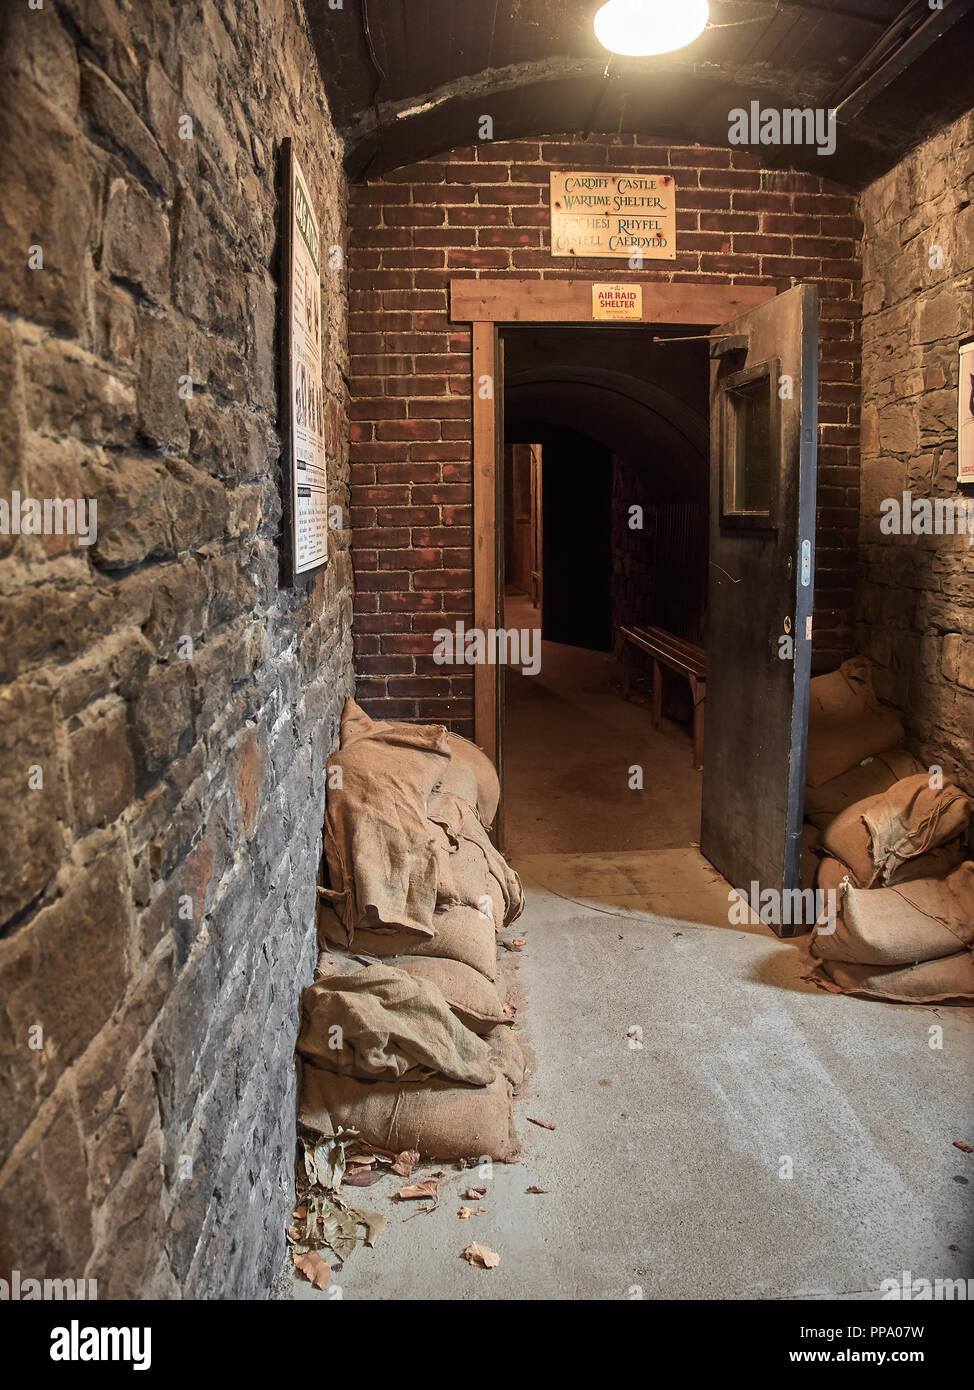 Cardiff, United Kingdom - September 16, 2018: View of inside rooms of the castle of Cardiff, used in the Second World War as repair from bombs Stock Photo